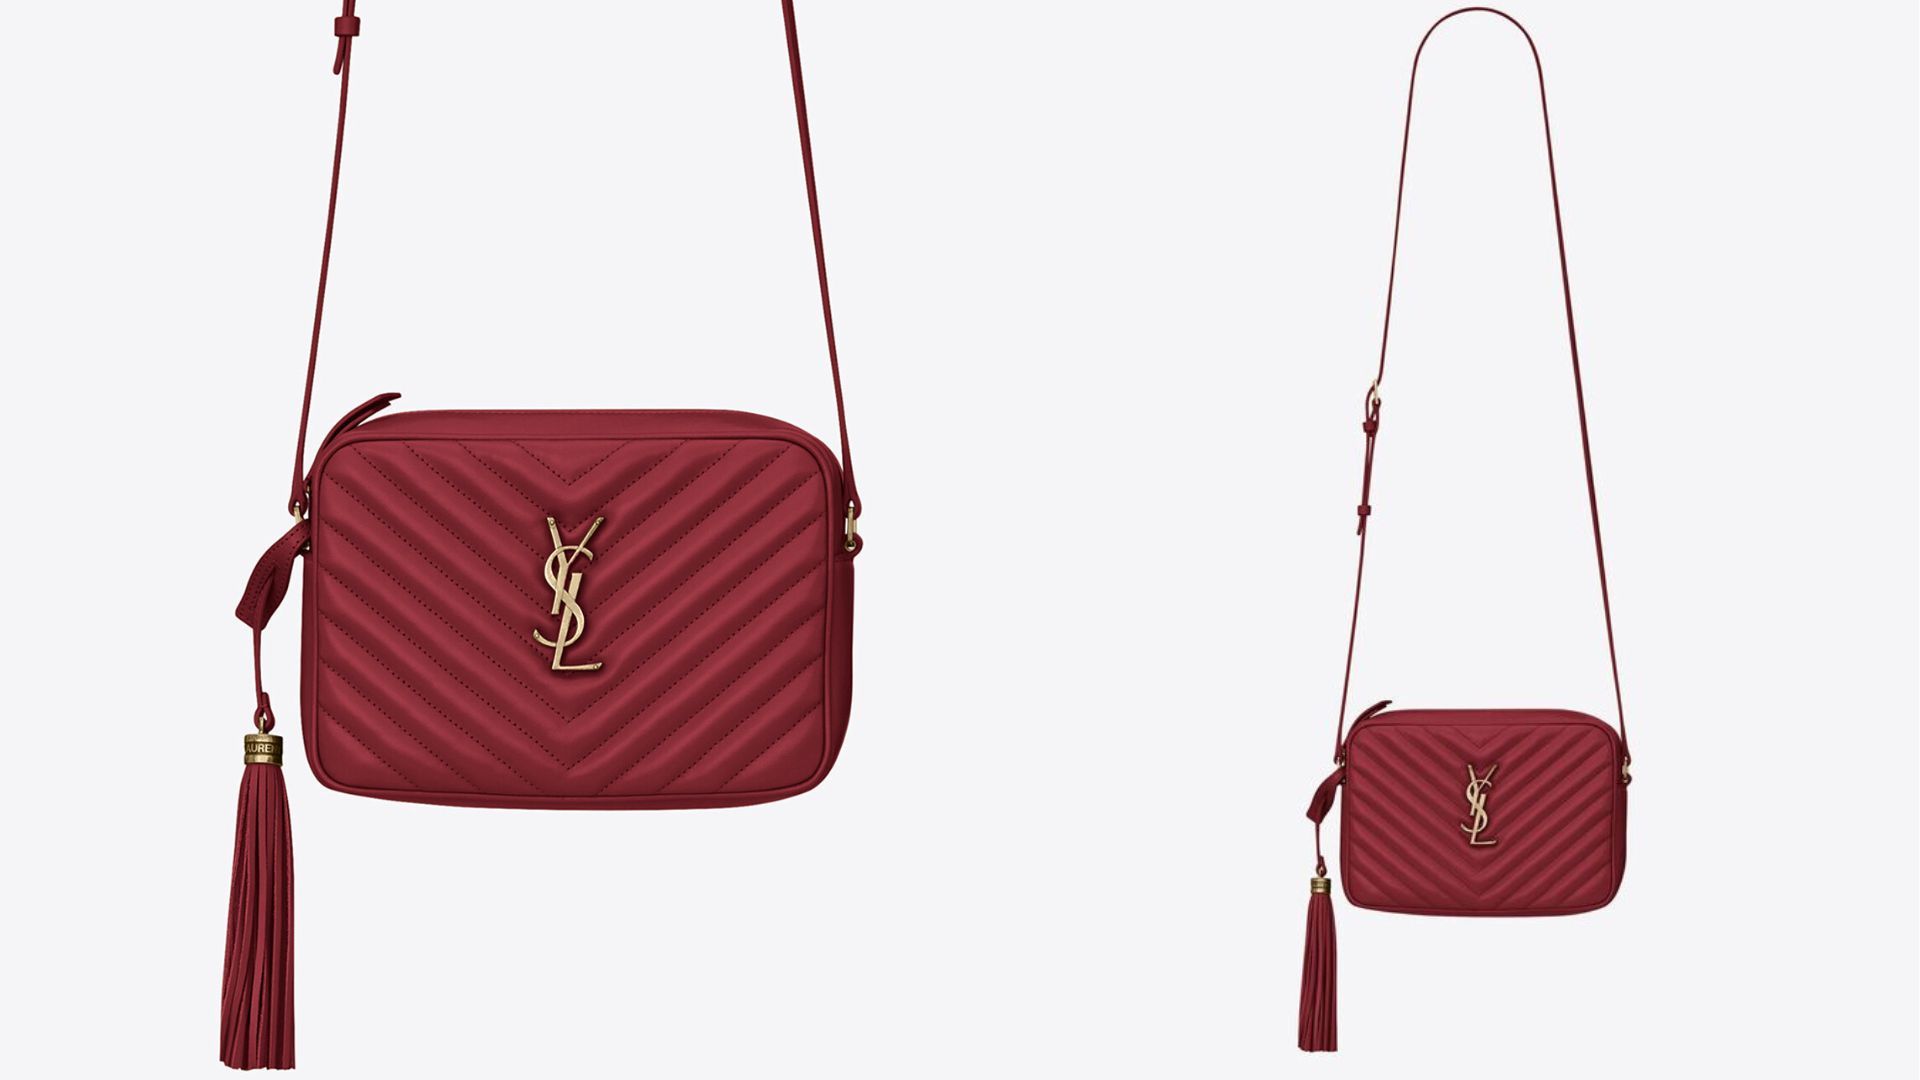 The best Saint Laurent bags you must add to your collection